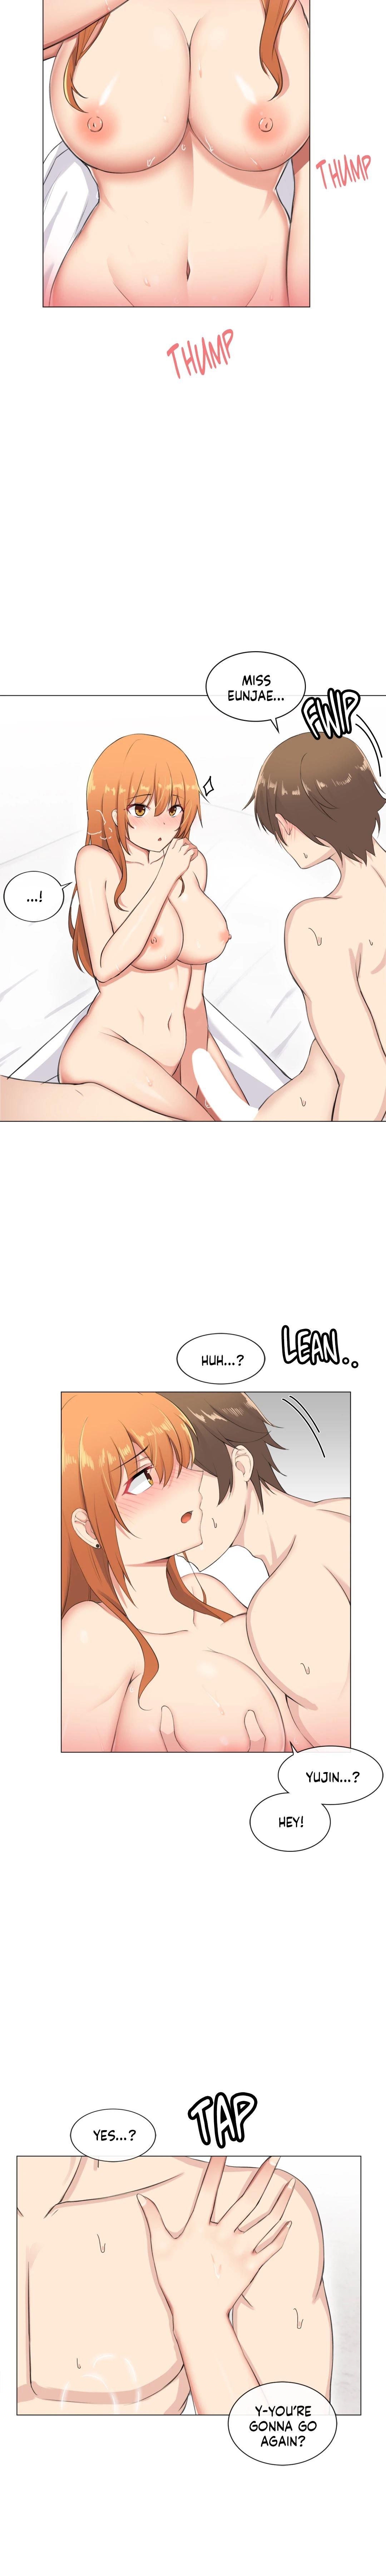 [Dumangoon, 130F] Sexcape Room: Pile Up Ch.9/9 [English] [Manhwa PDF] Completed 150